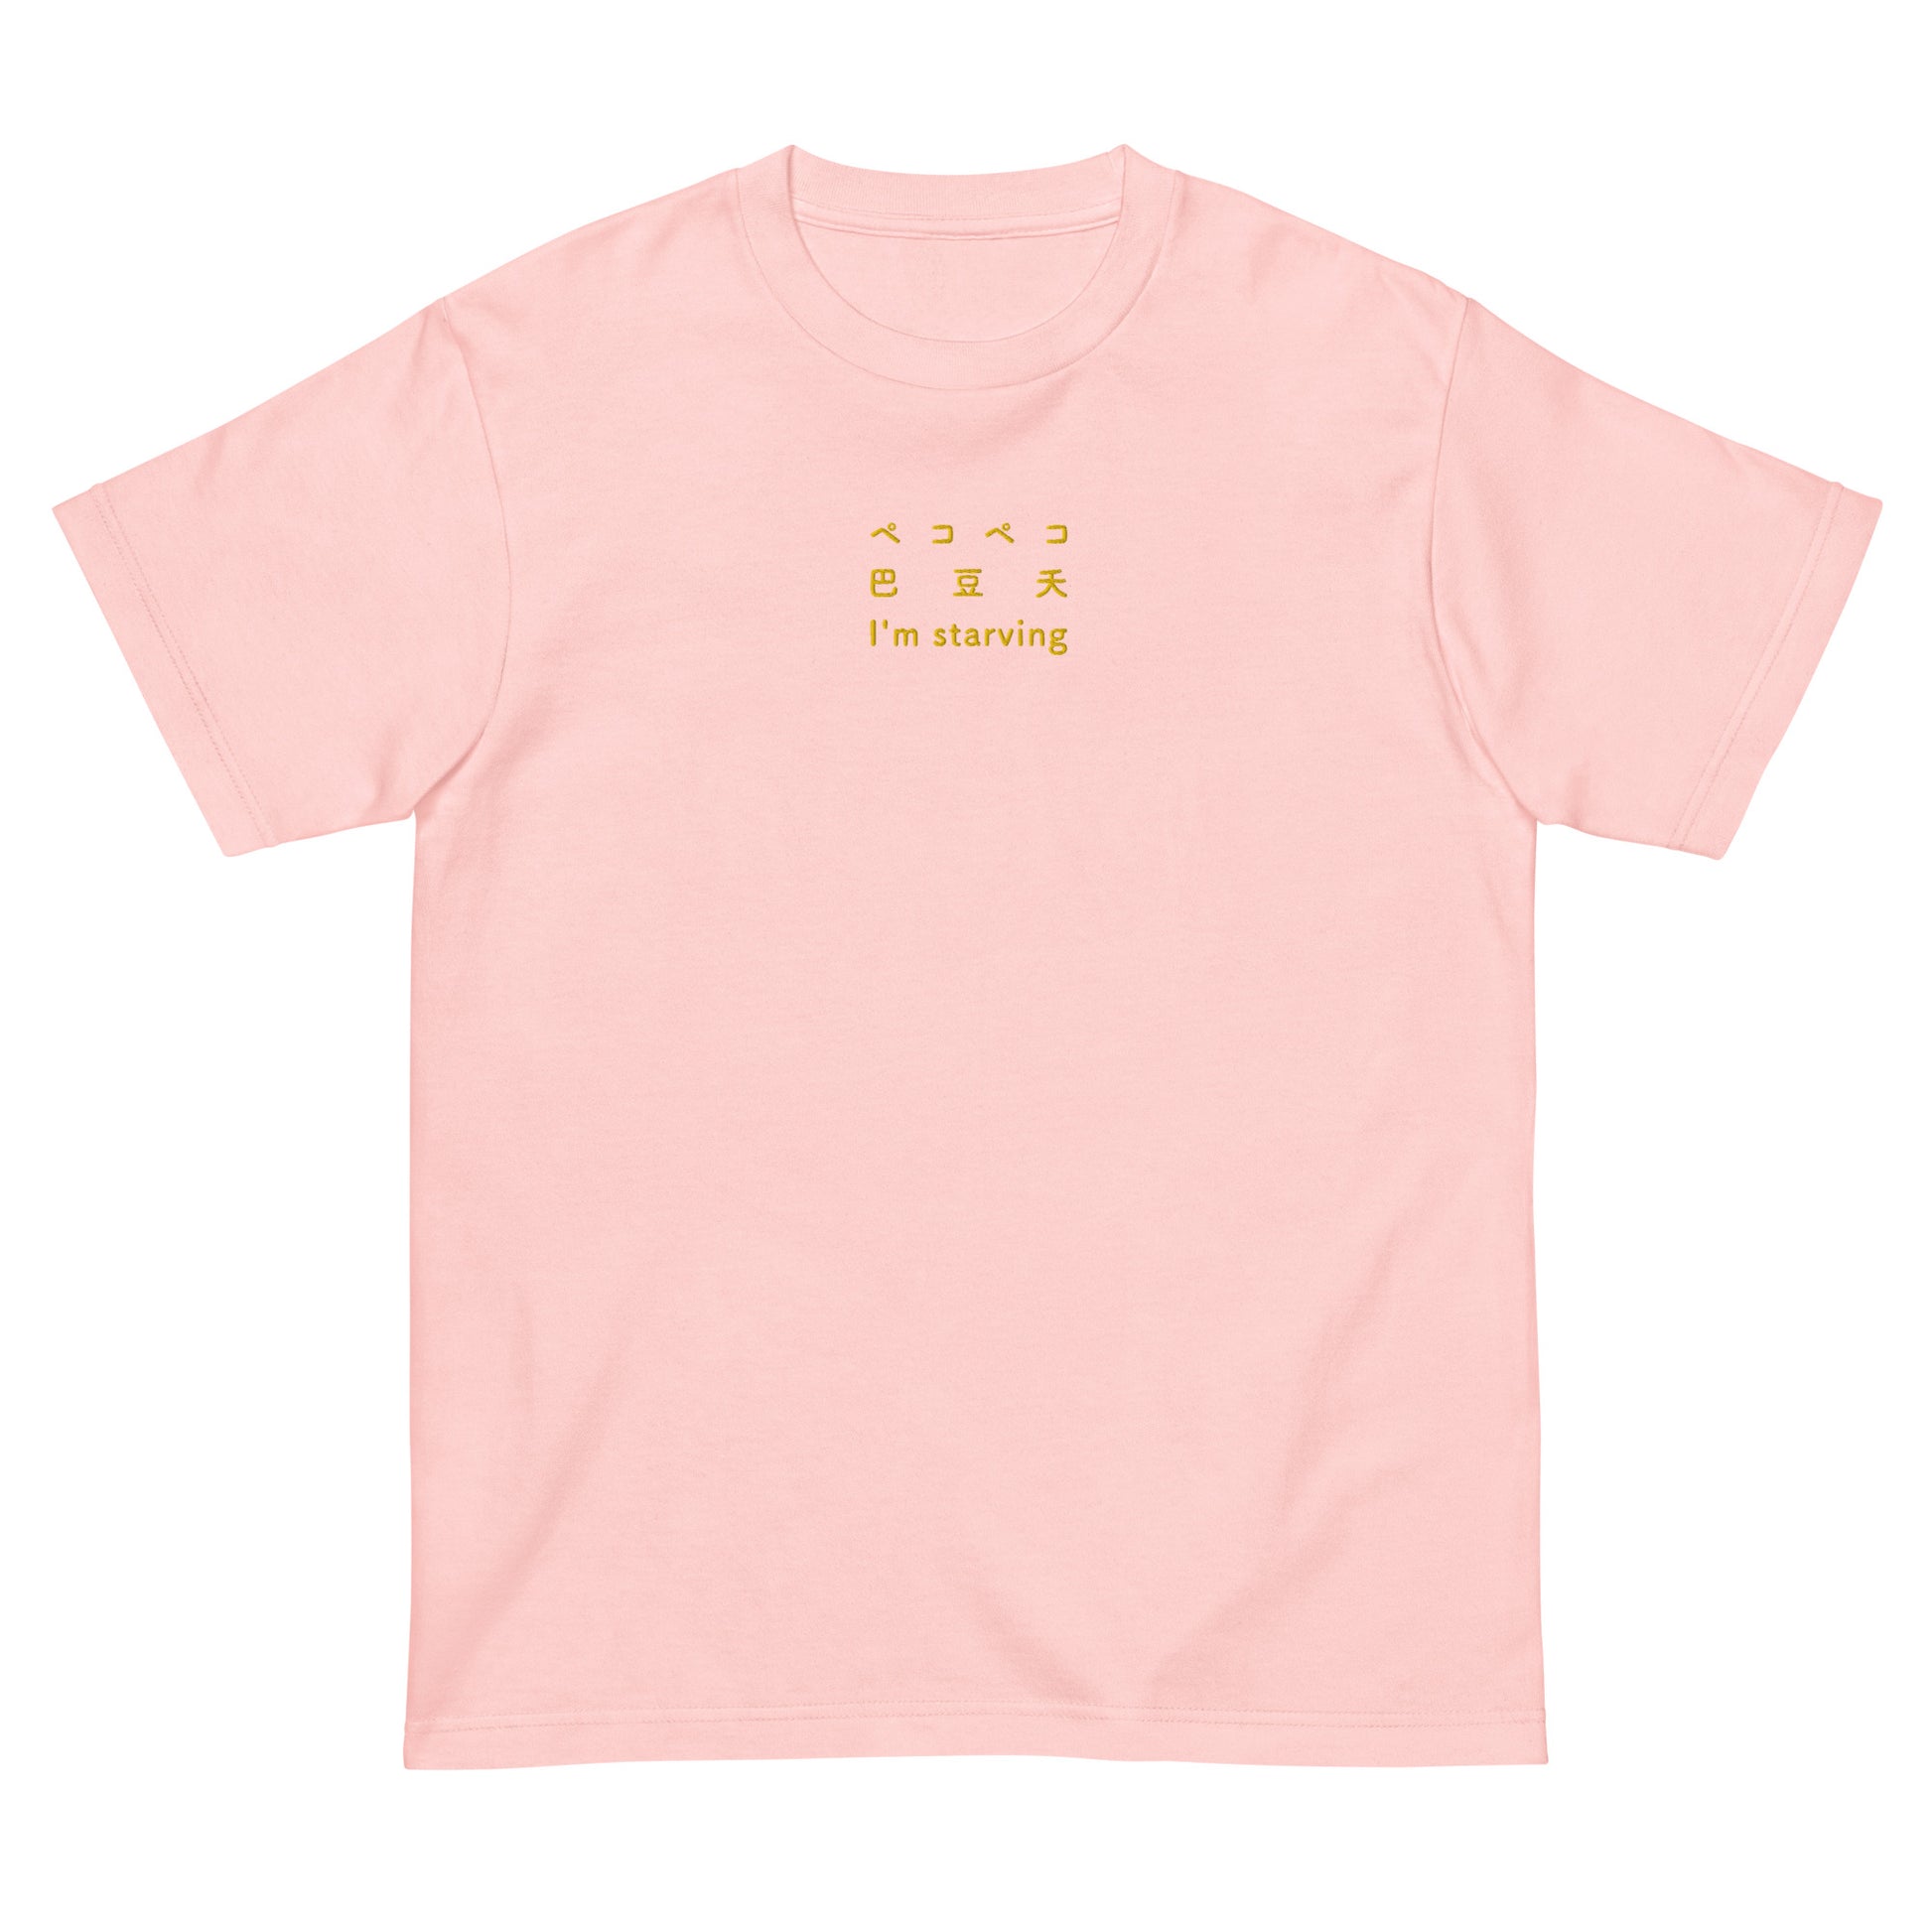 Light Pink High Quality Tee - Front Design with an Yellow Embroidery "I'm Starving" in three languages